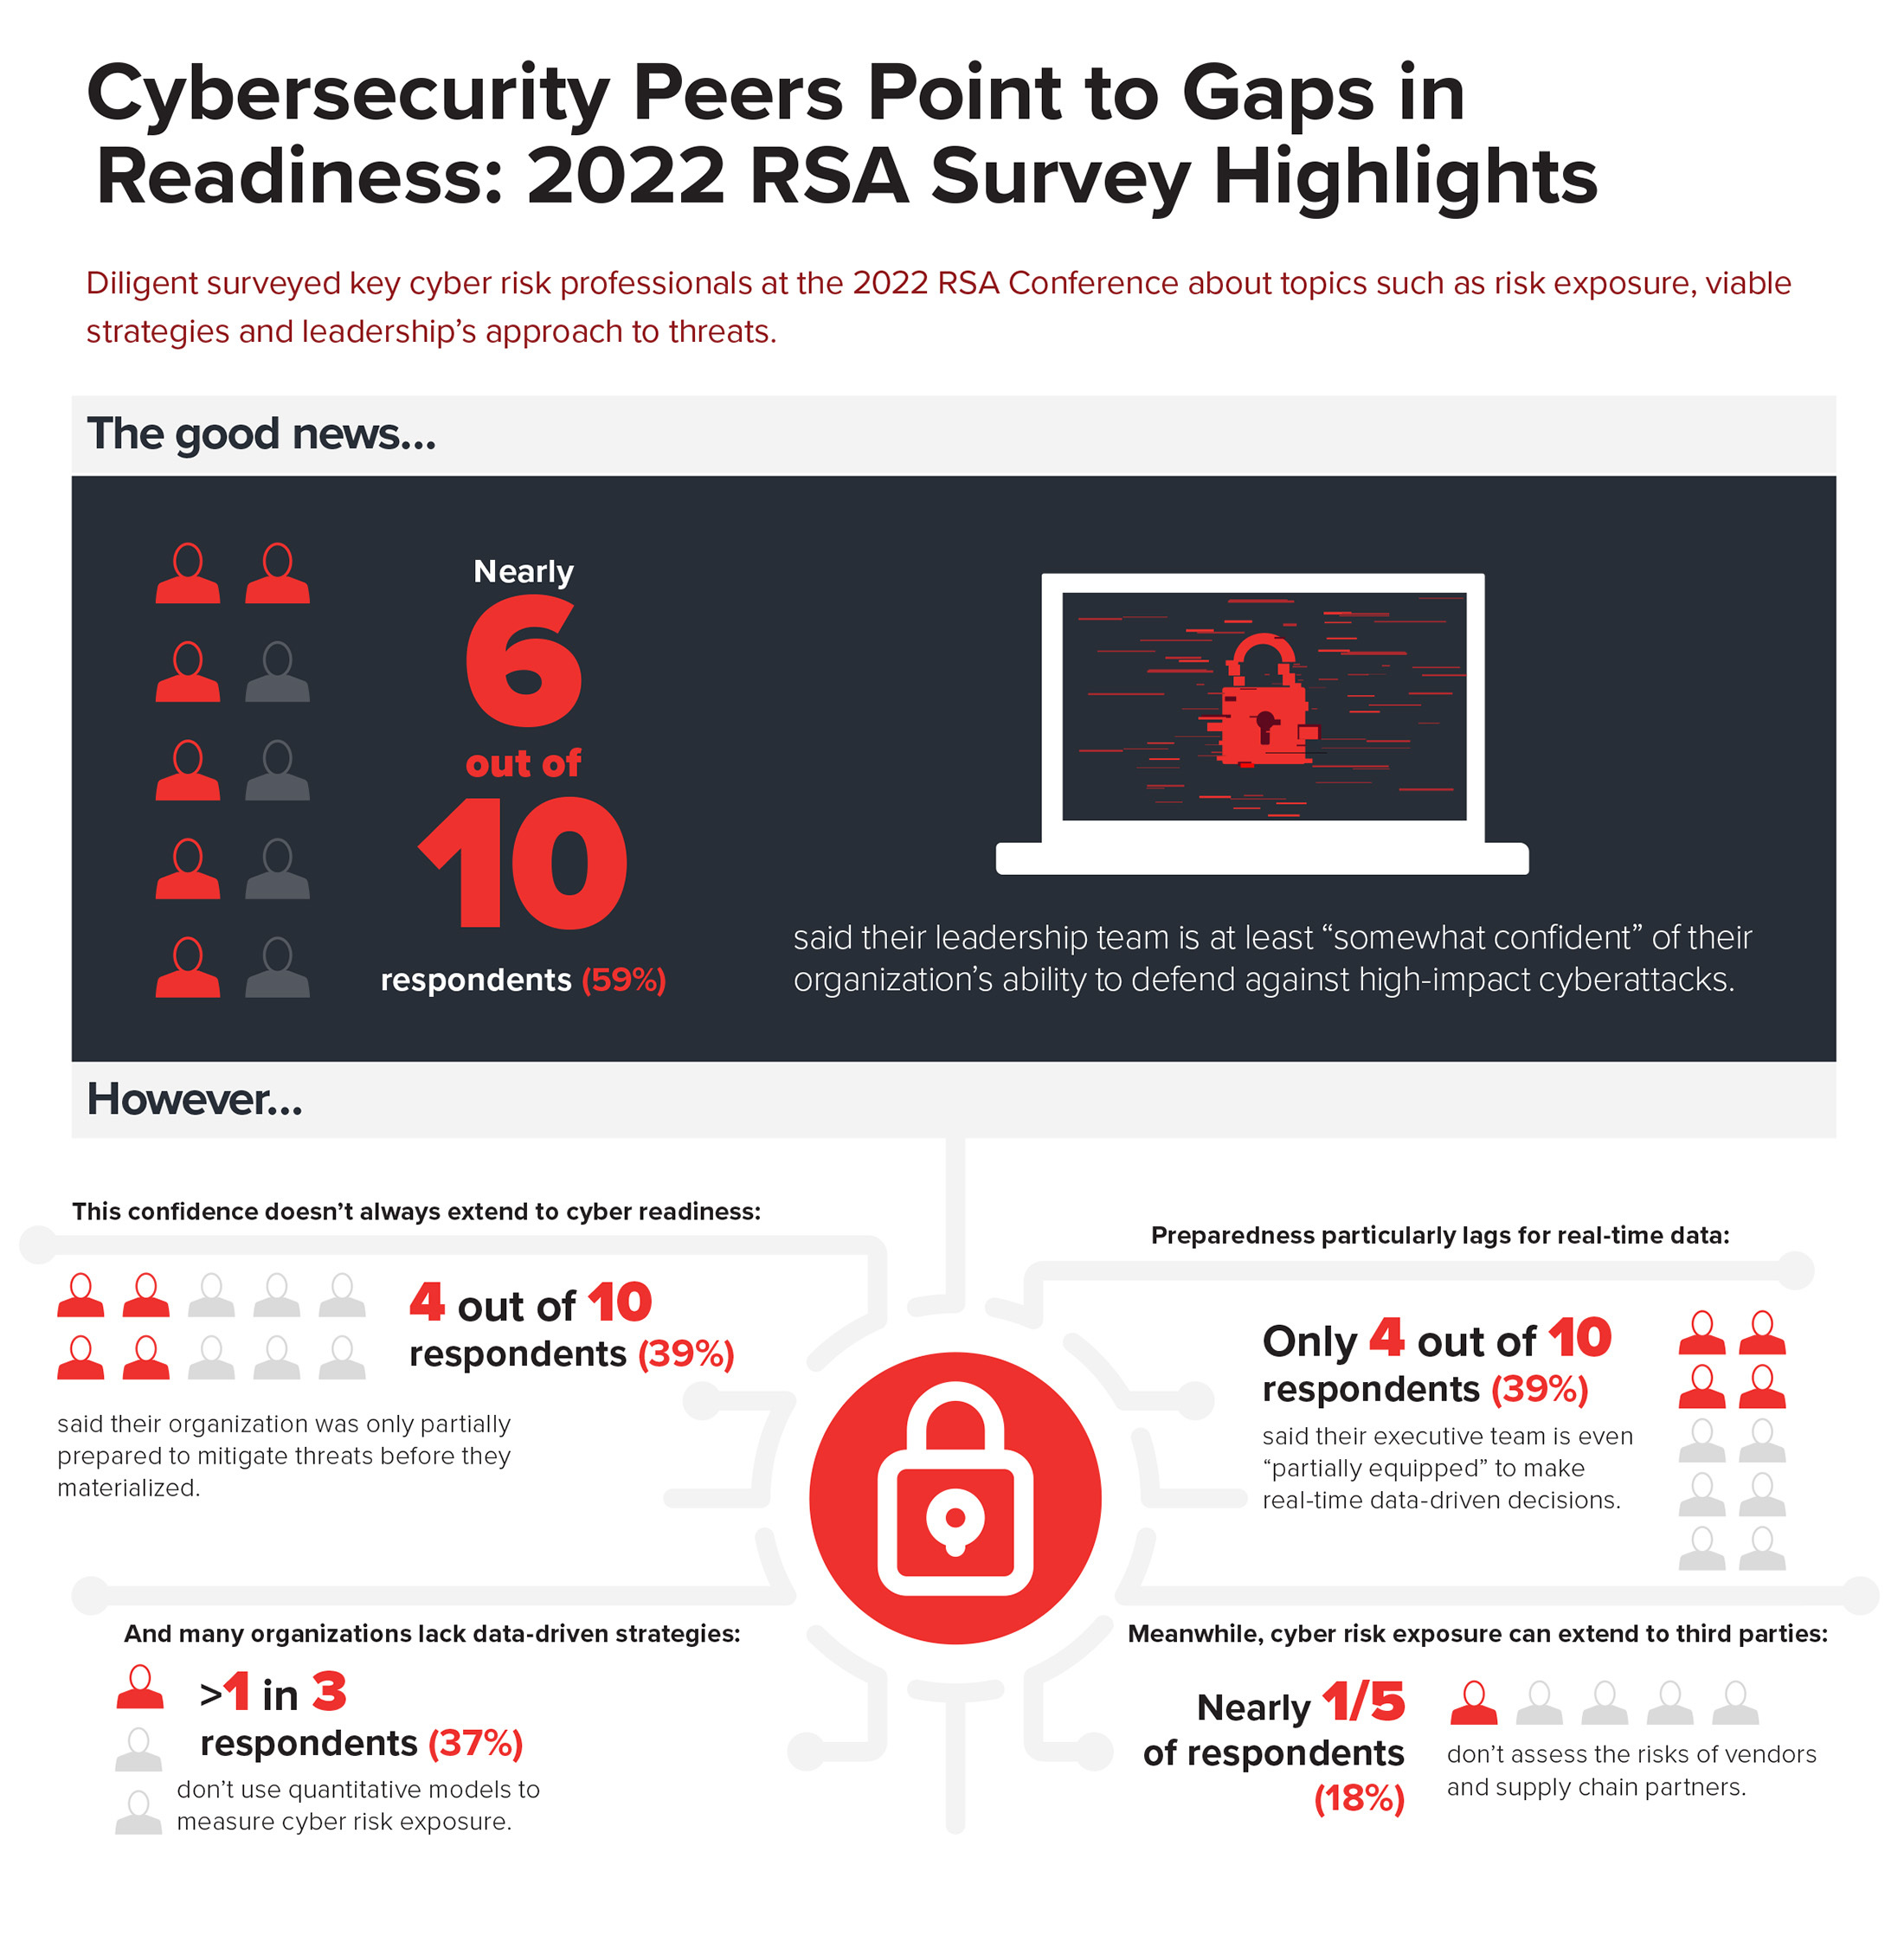 Cybersecurity Peers Point to Gaps in Readiness: 2022 RSA Survey Highlights